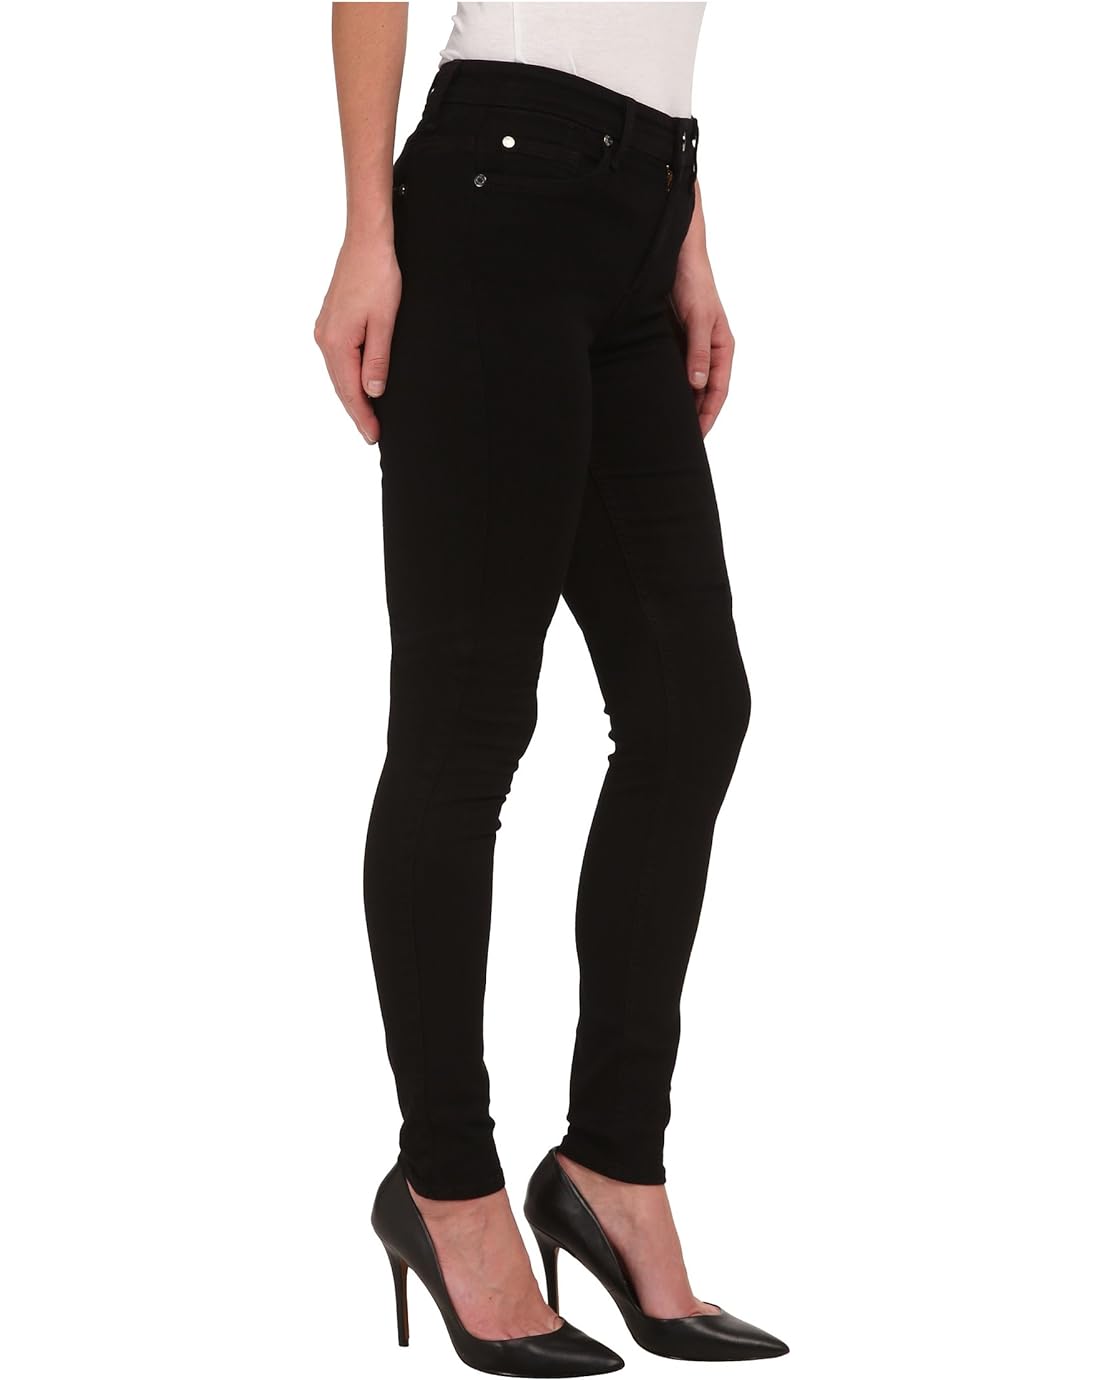  7 For All Mankind The Highwaist Skinny w/ Contour Waistband in Slim Illusion Luxe Black